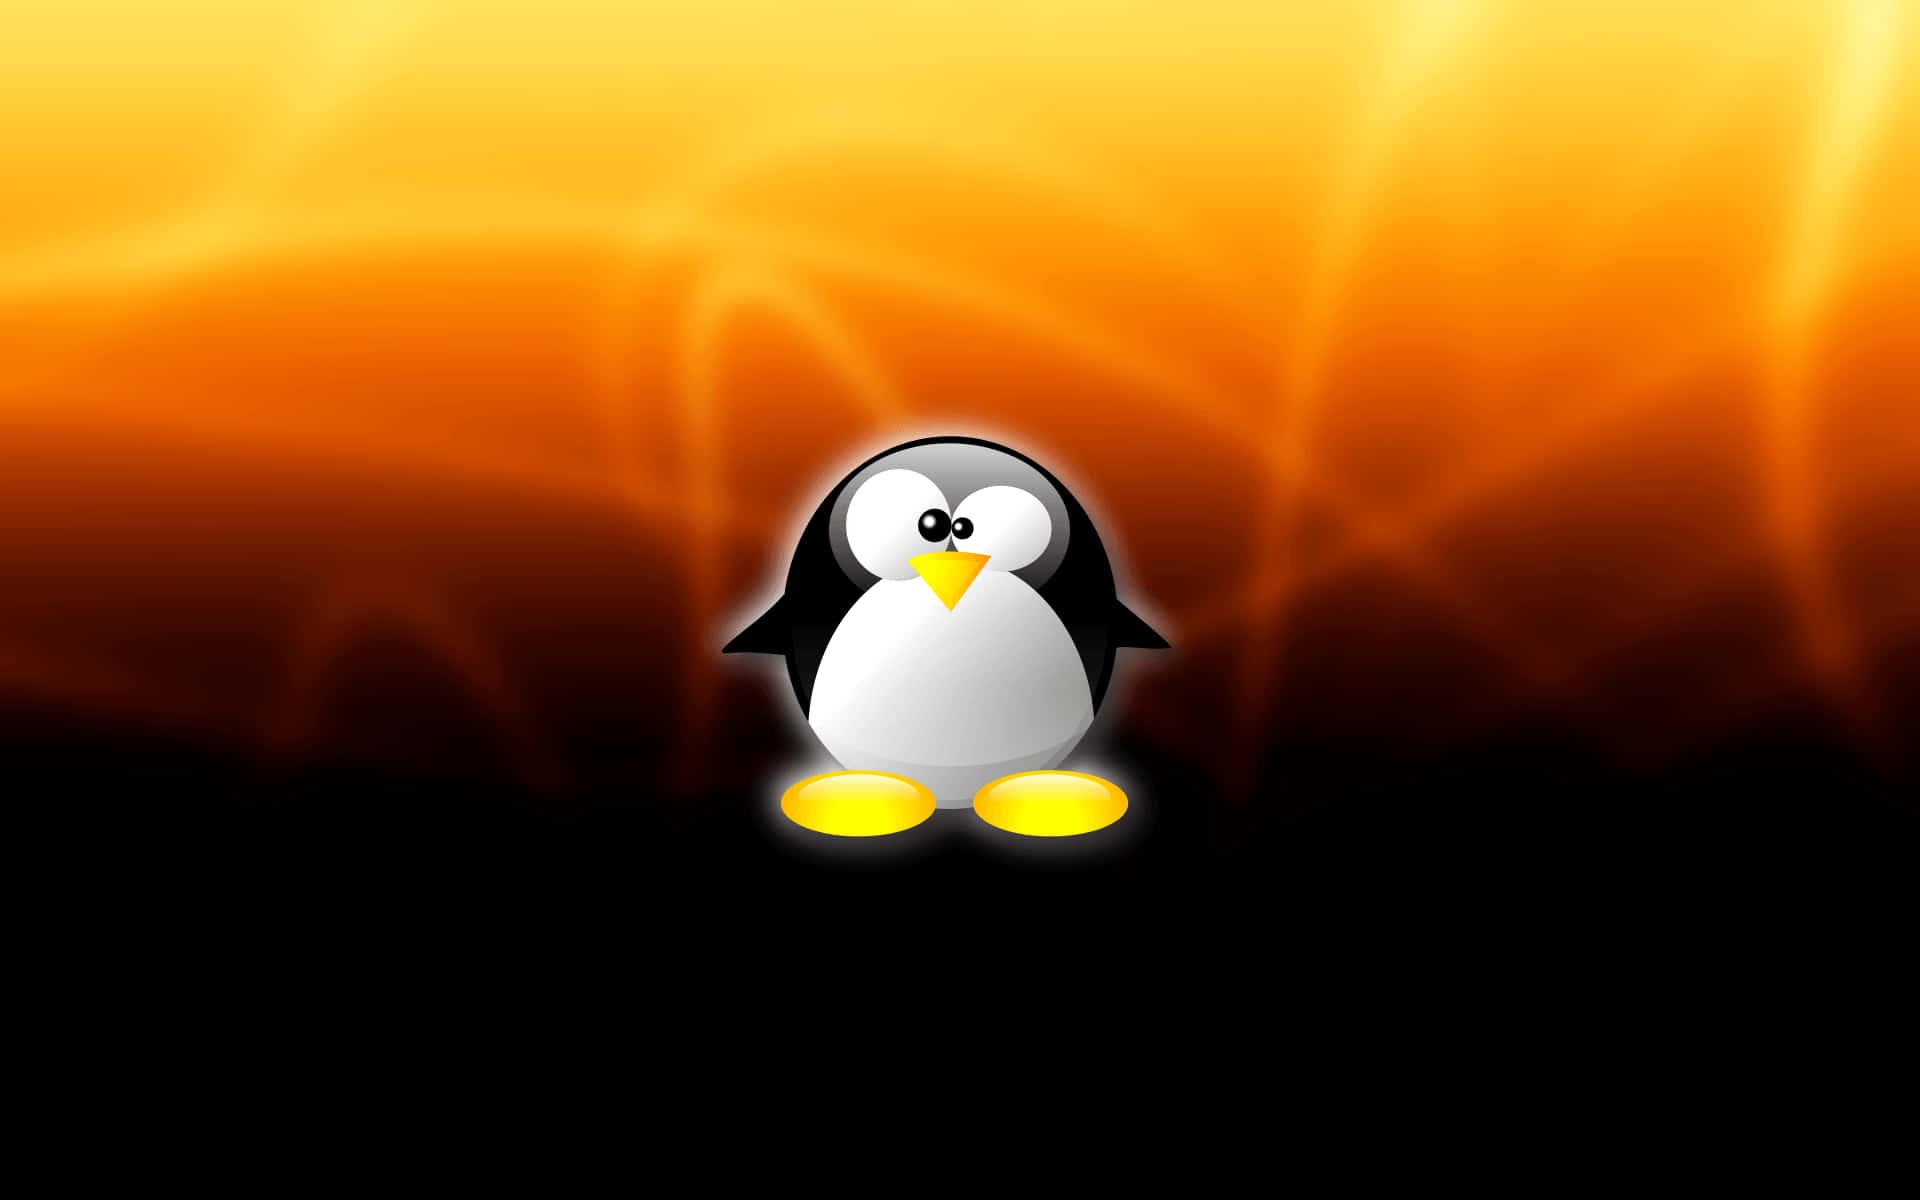 "Start your digital journey today with a Linux OS."